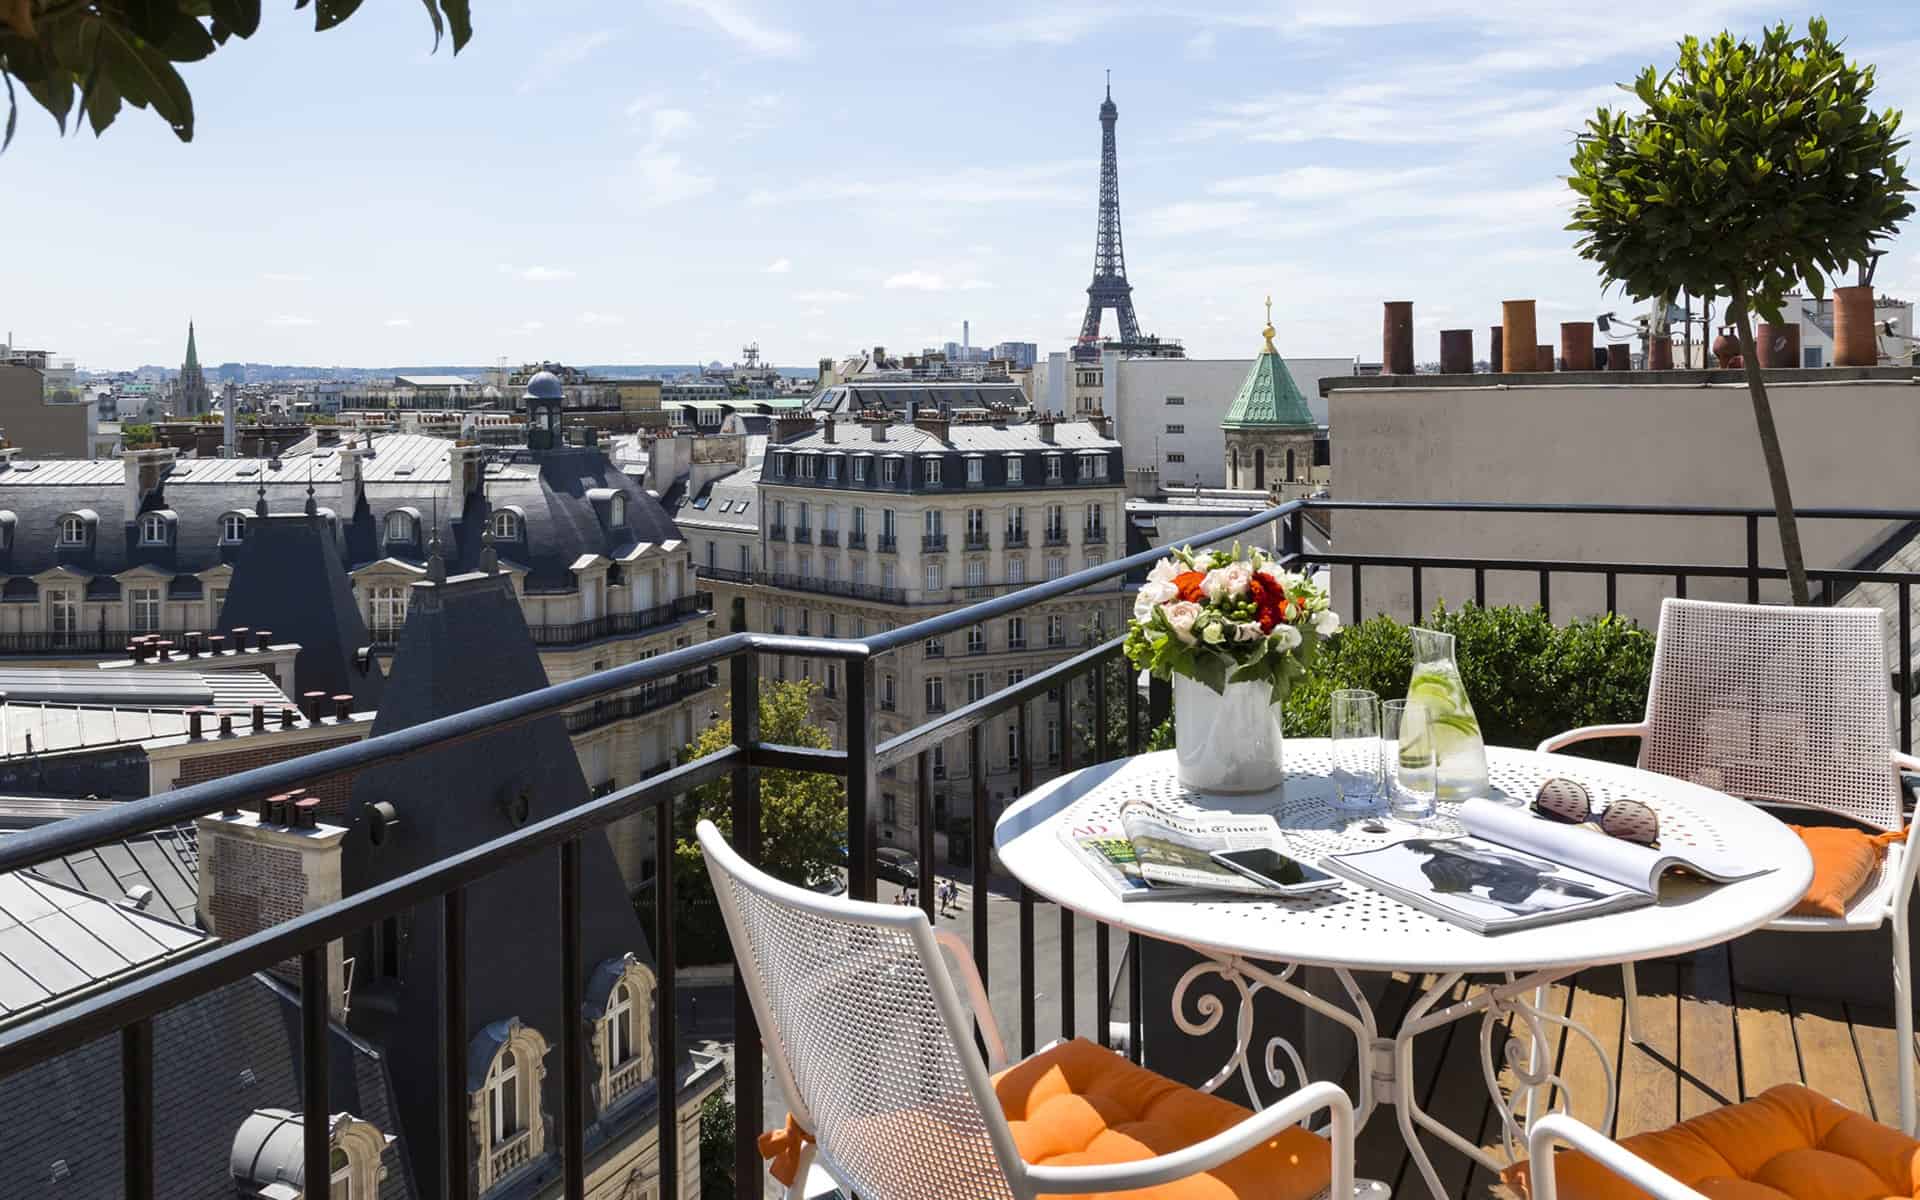 Hôtel San Régis is one of the hotels in Paris with Eiffel Tower Views and is in an mansion 